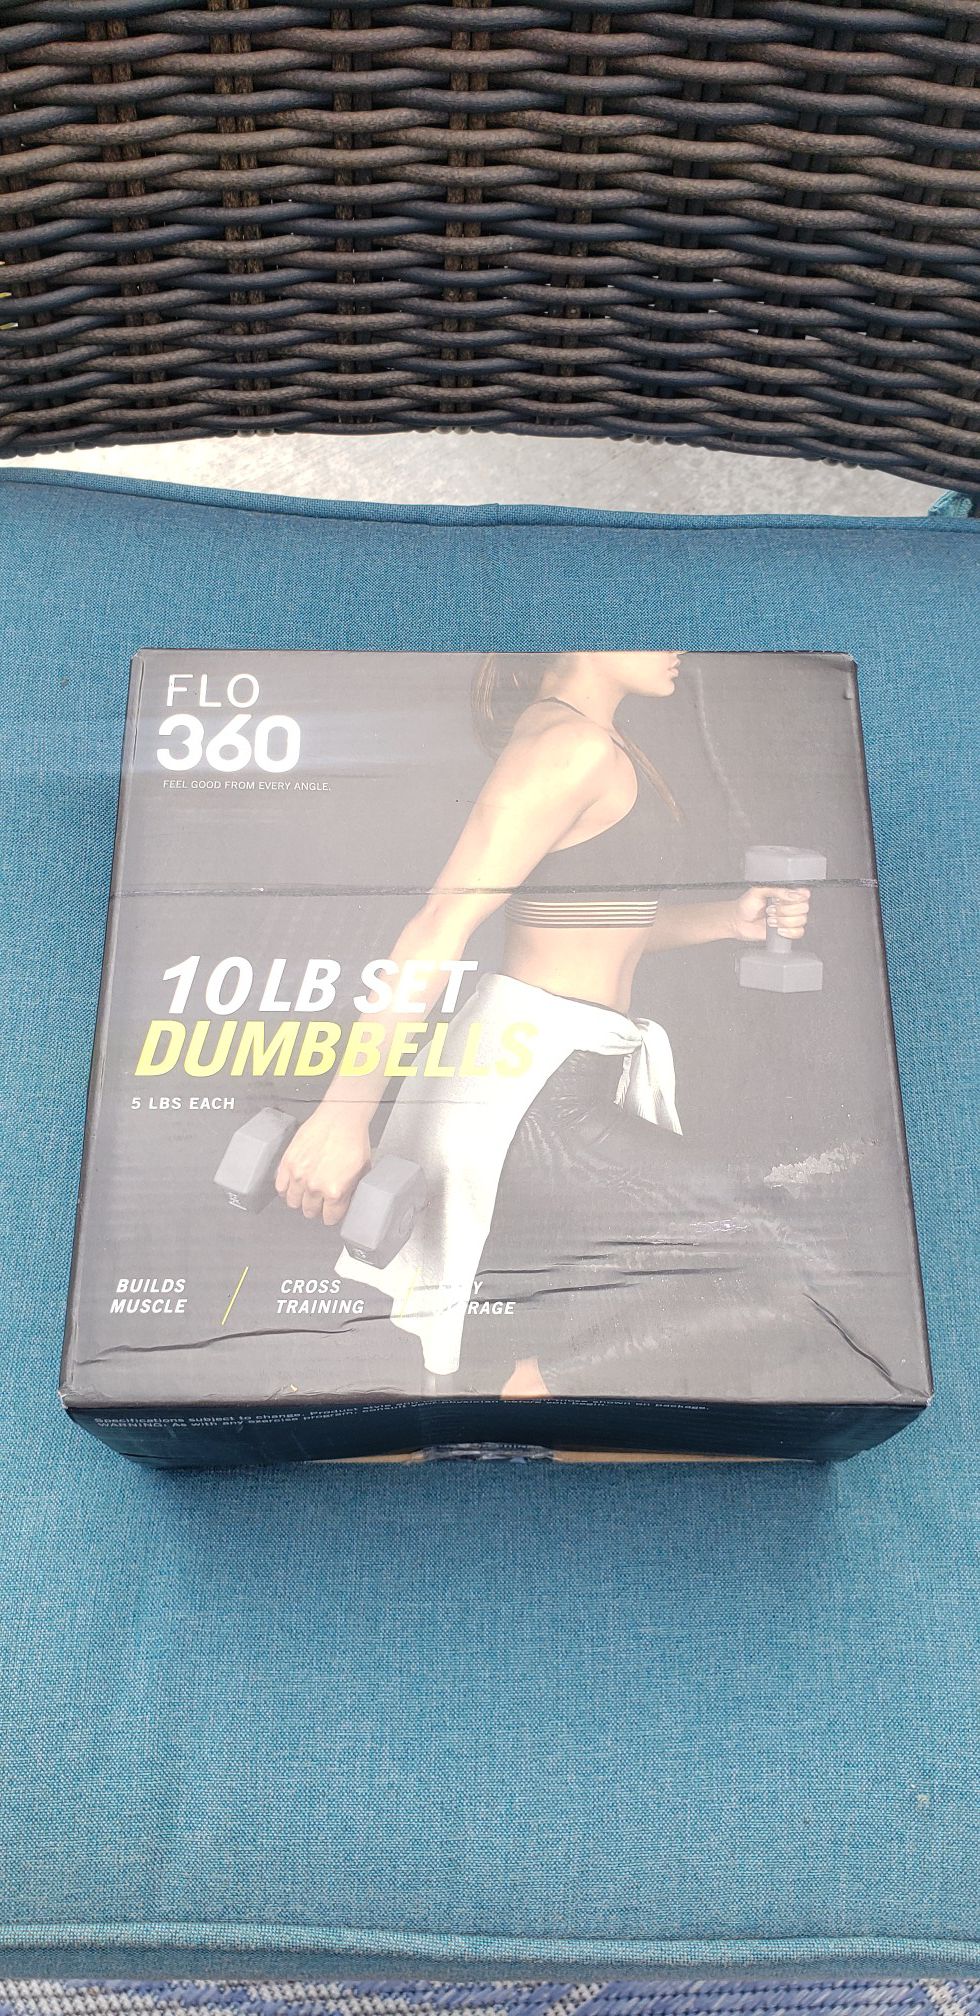 Pair Dumbbell 10lbs Total $15 (New)